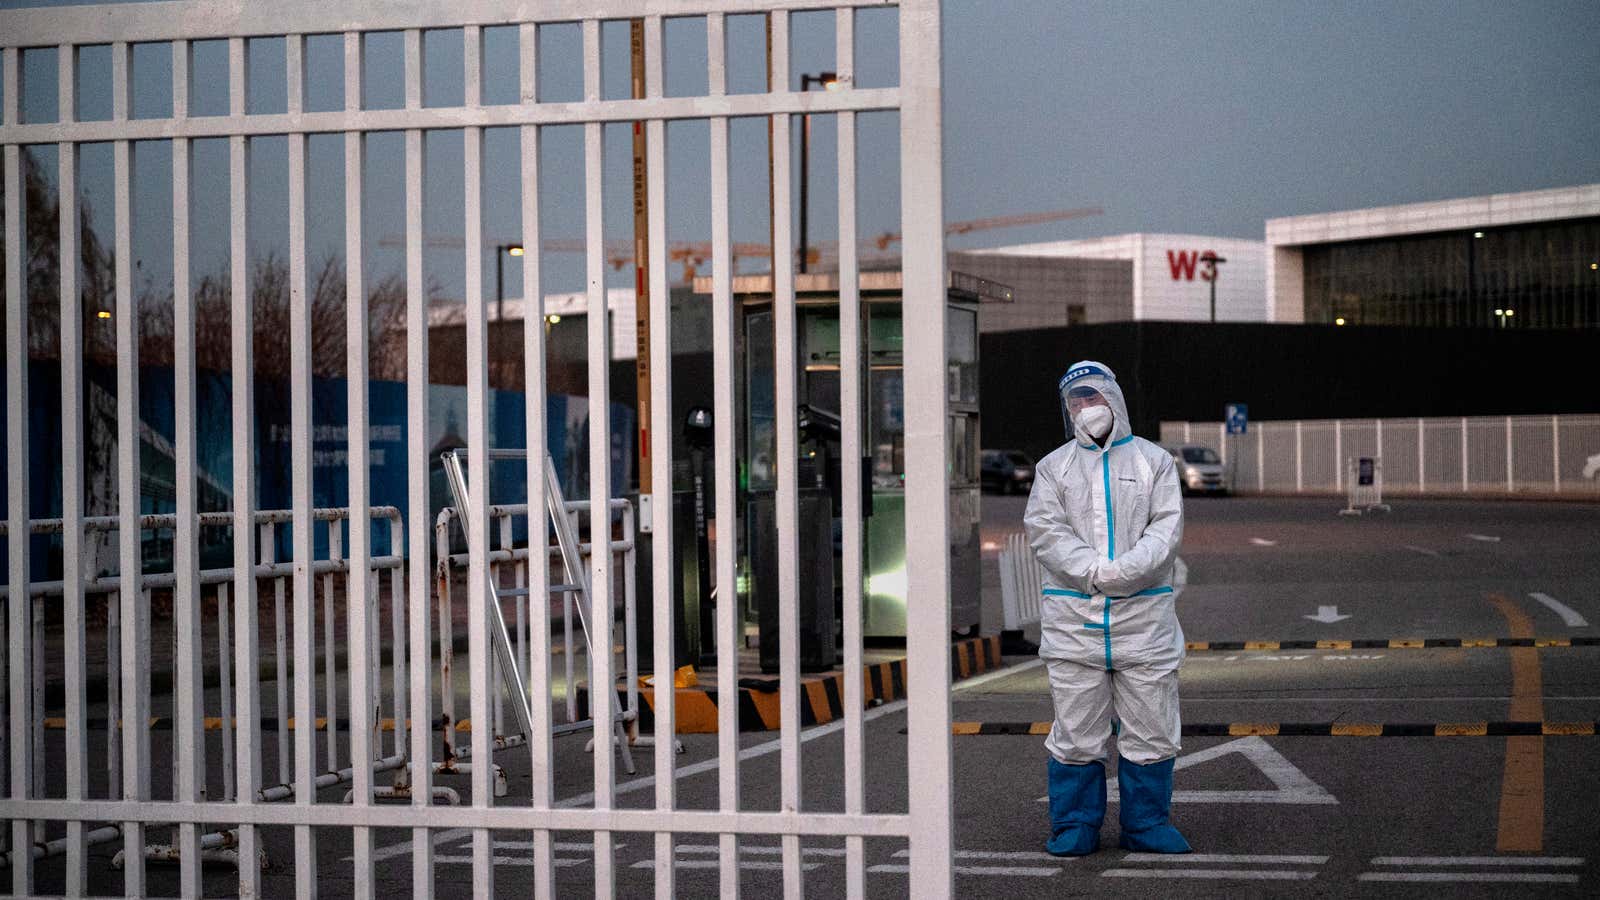 An epidemic control worker wears PPE to protect against the spread of COVID-19 as he guards the gate of a government quarantine facility on December 7, 2022 in Beijing, China.